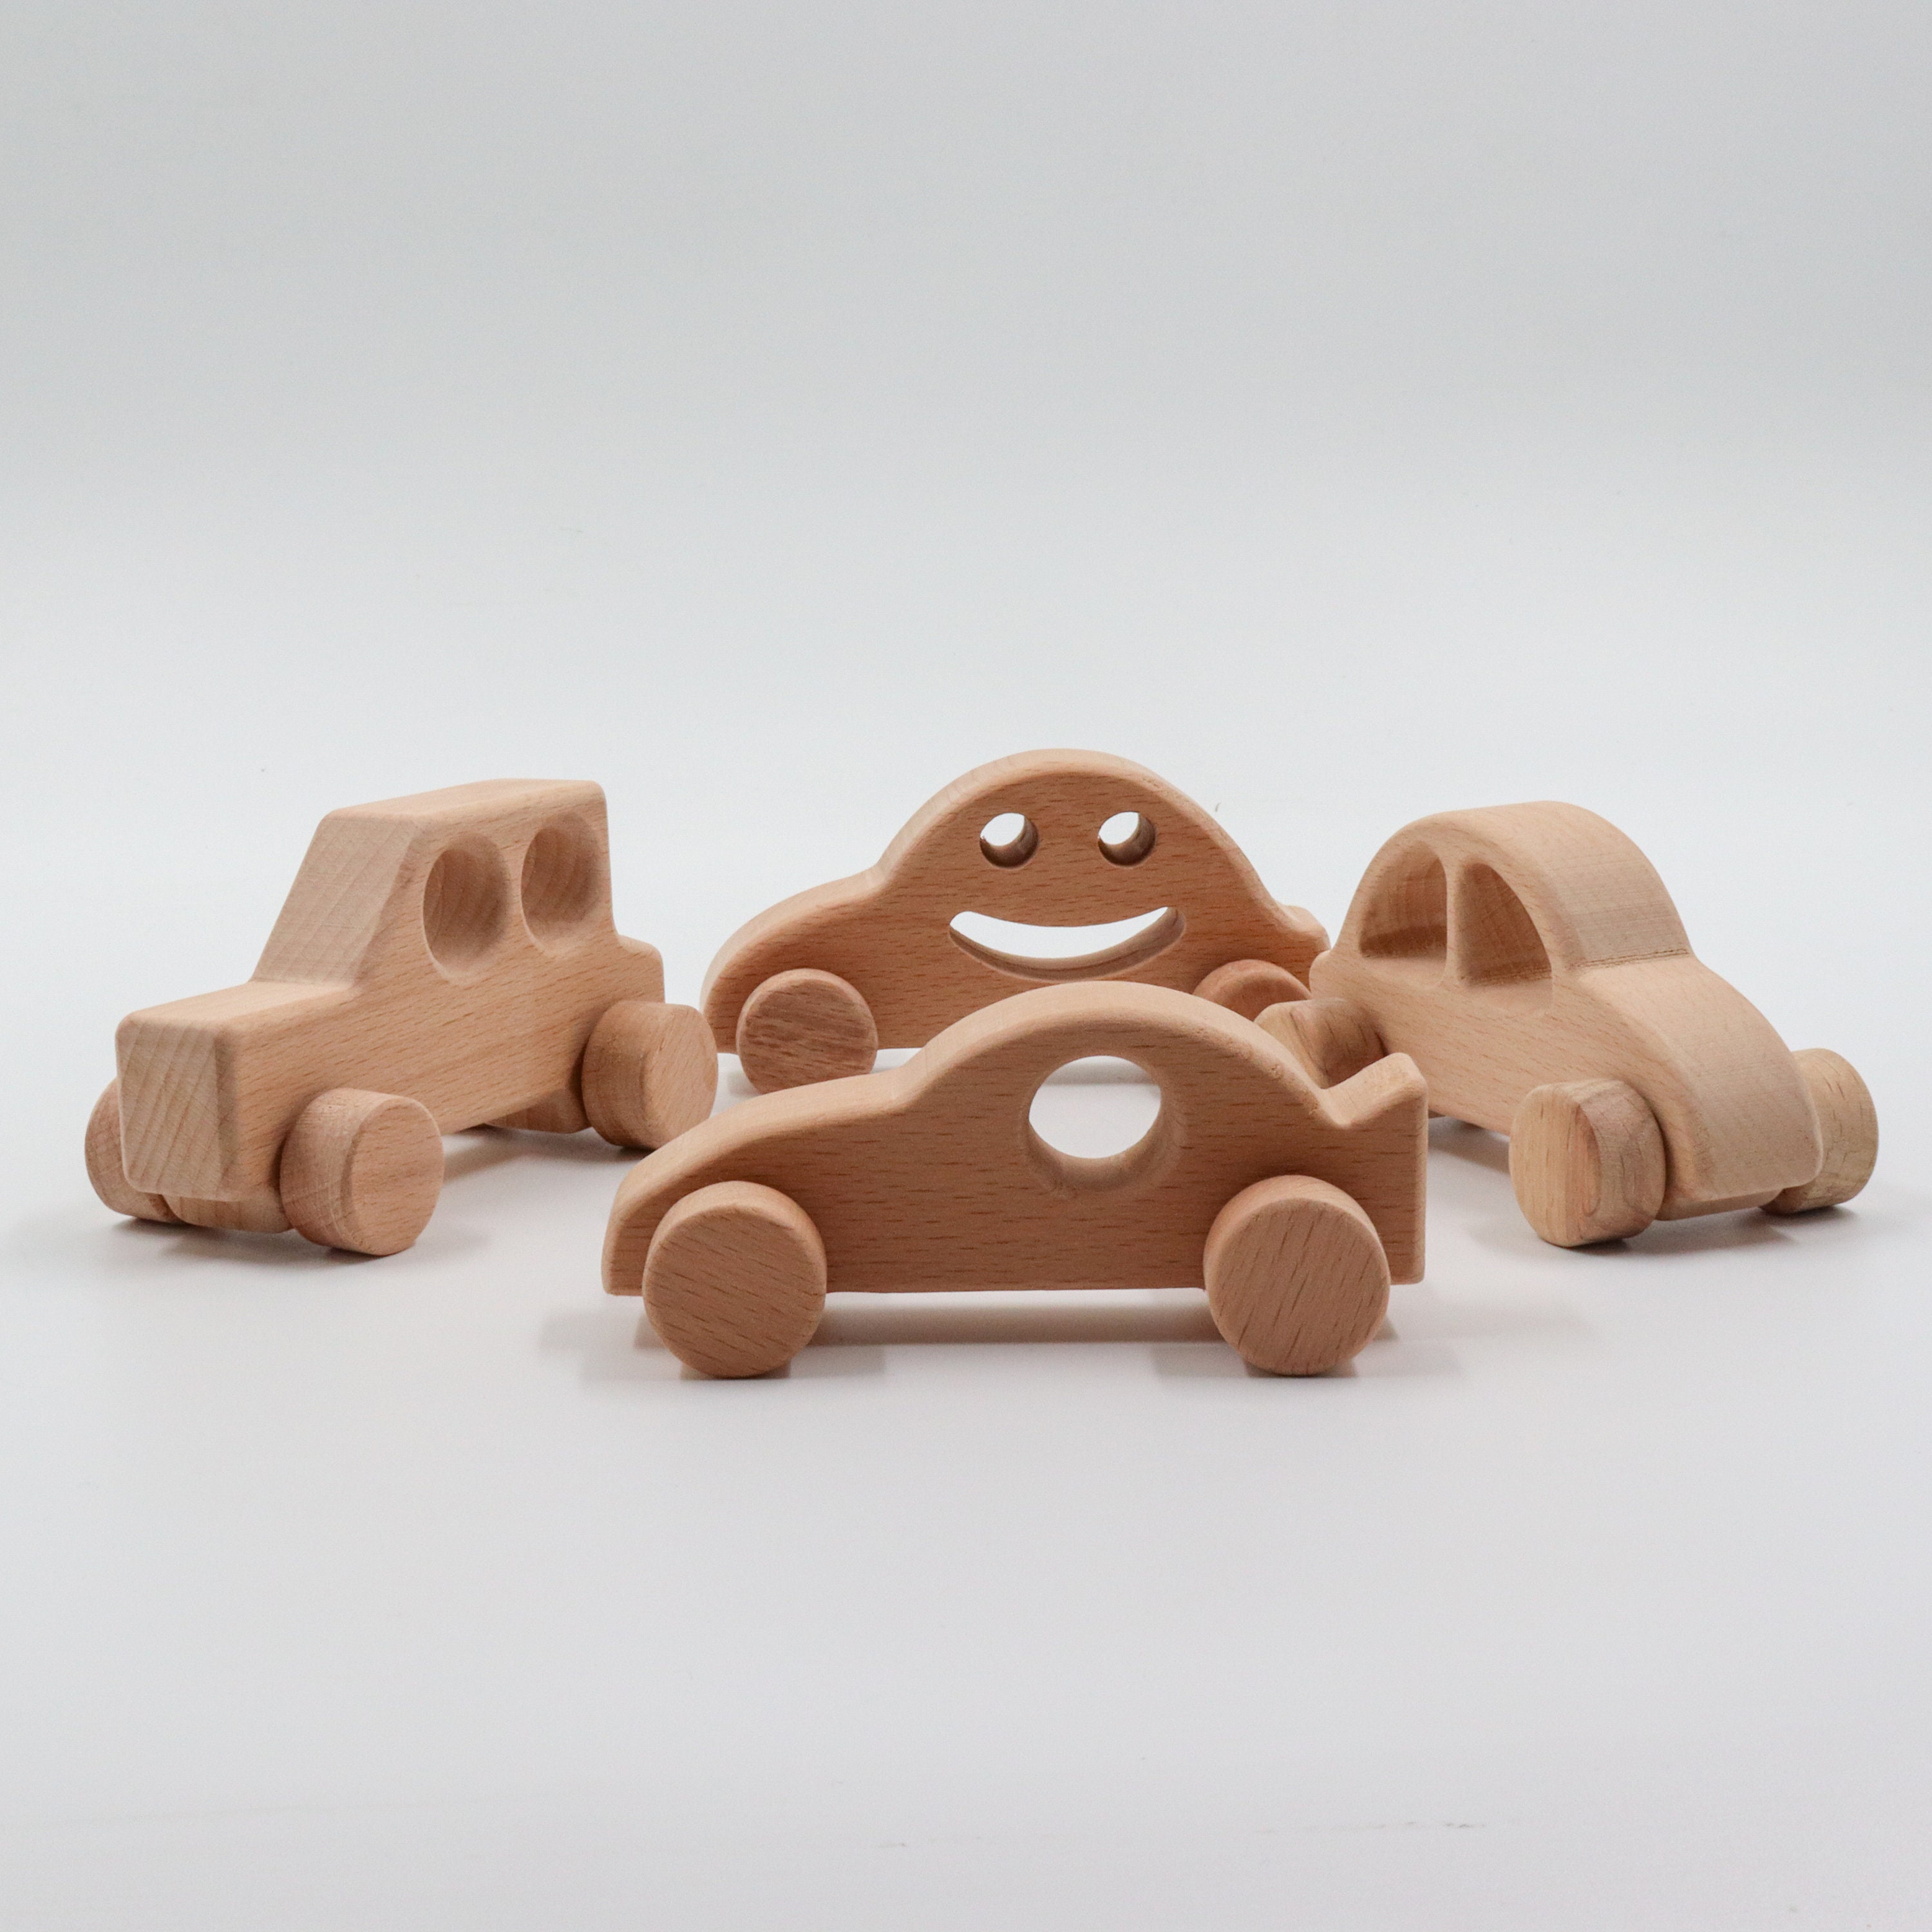 Toddler Wooden Toys Holiday Gift List - inAra By May Pham